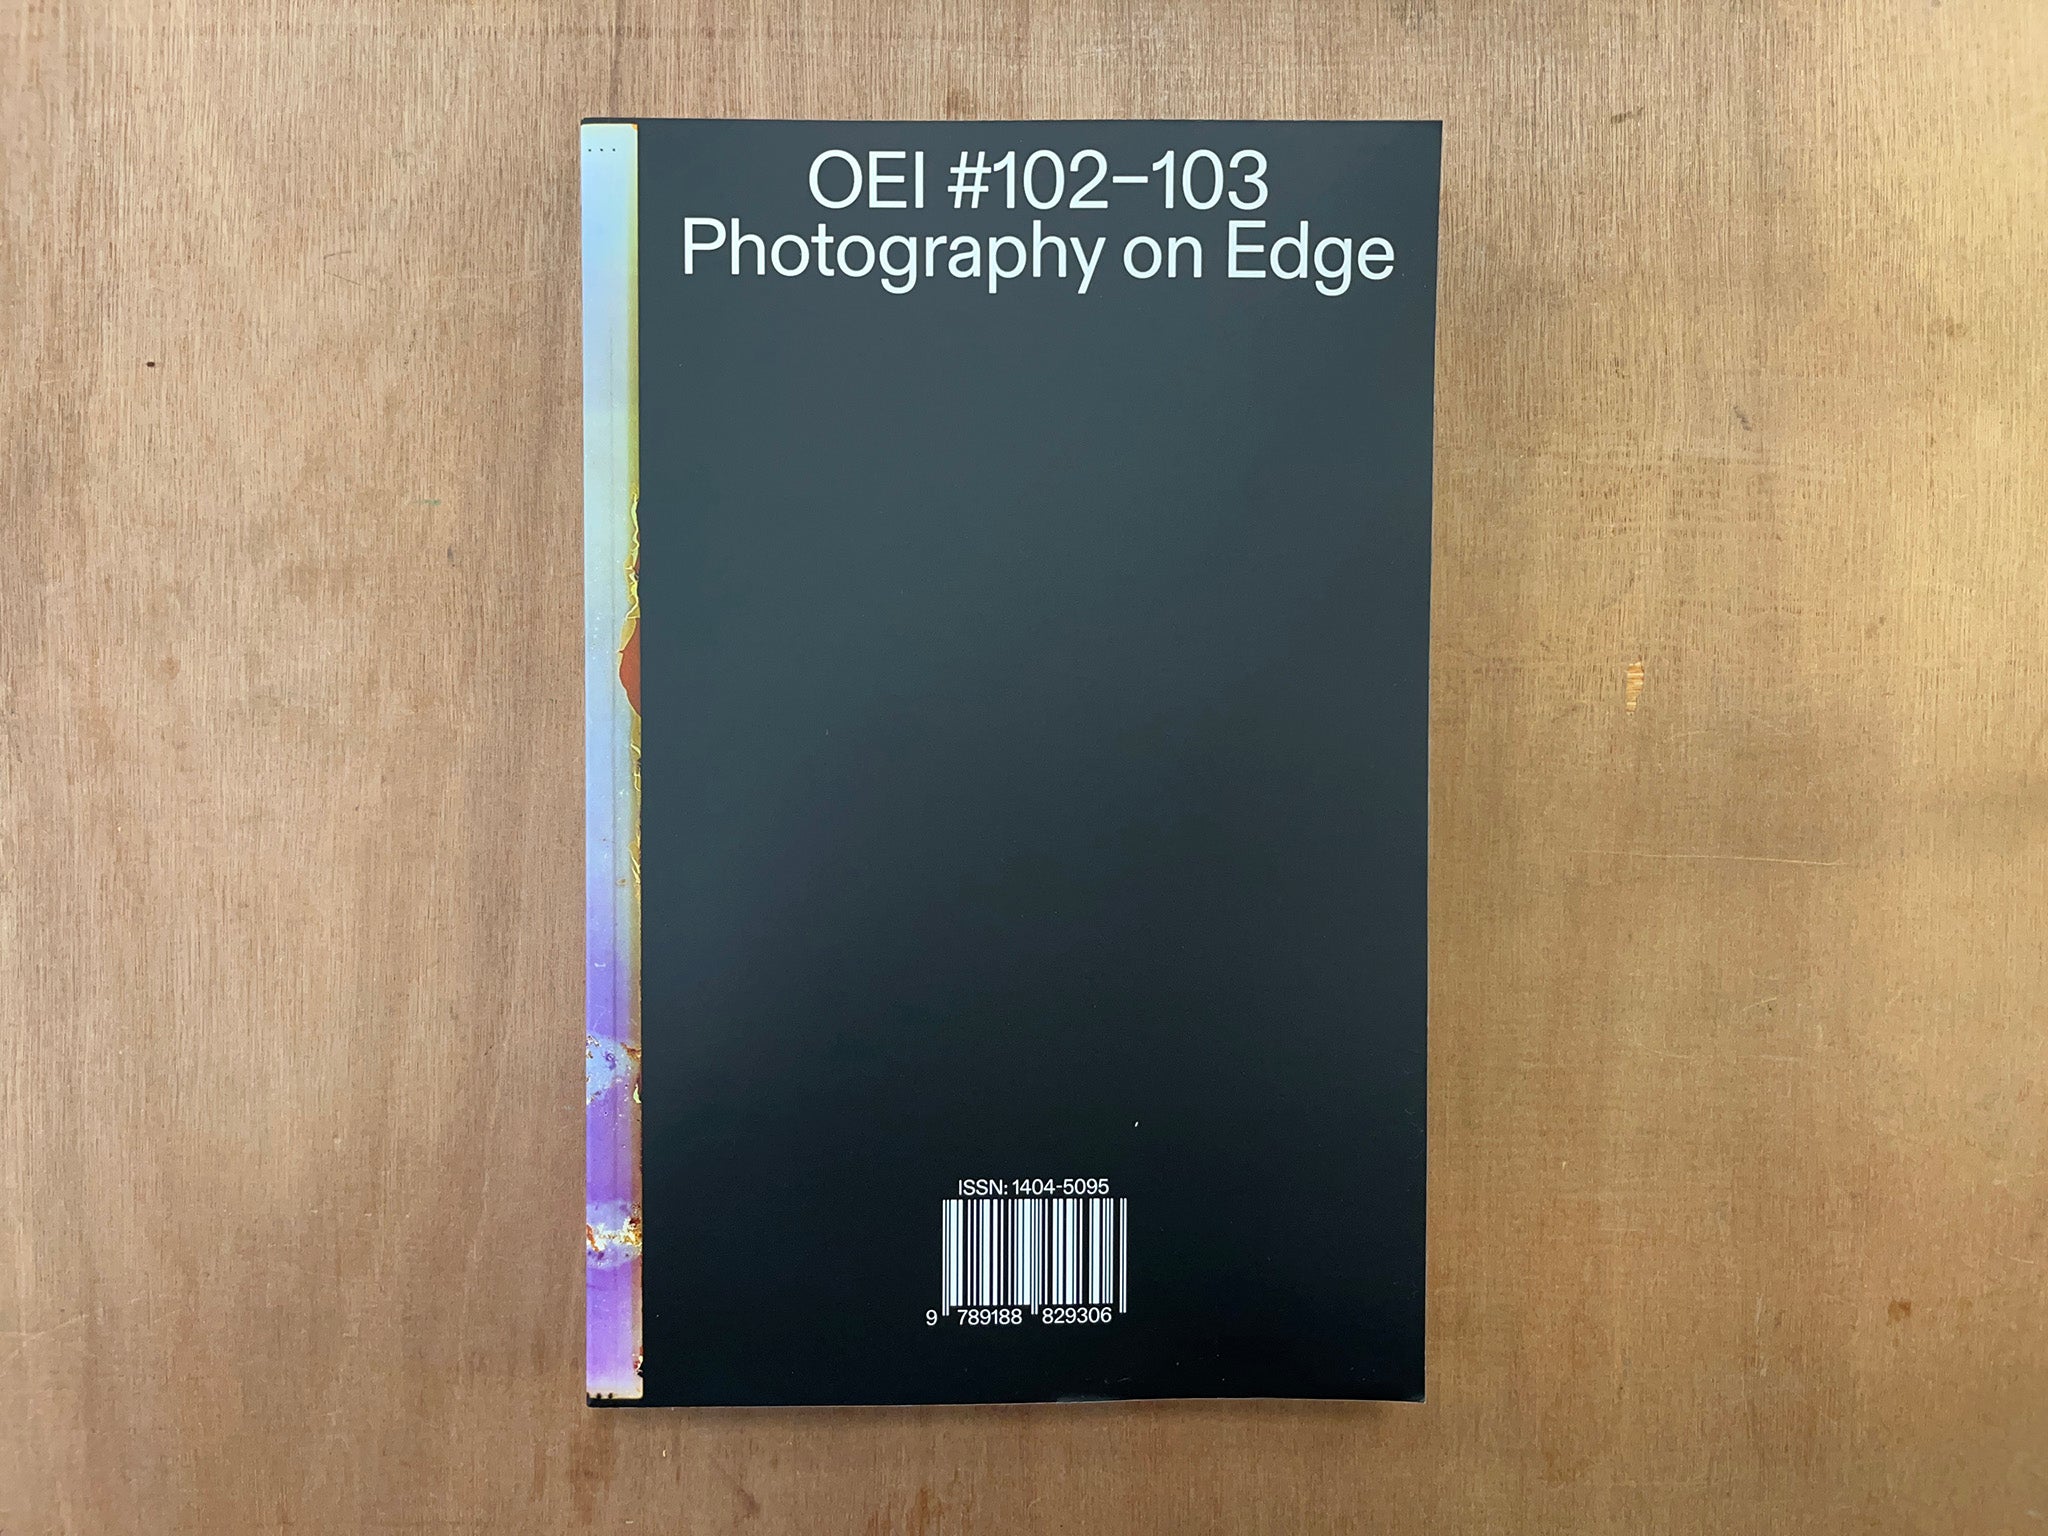 OEI #102-103: PHOTOGRAPHY ON THE EDGE